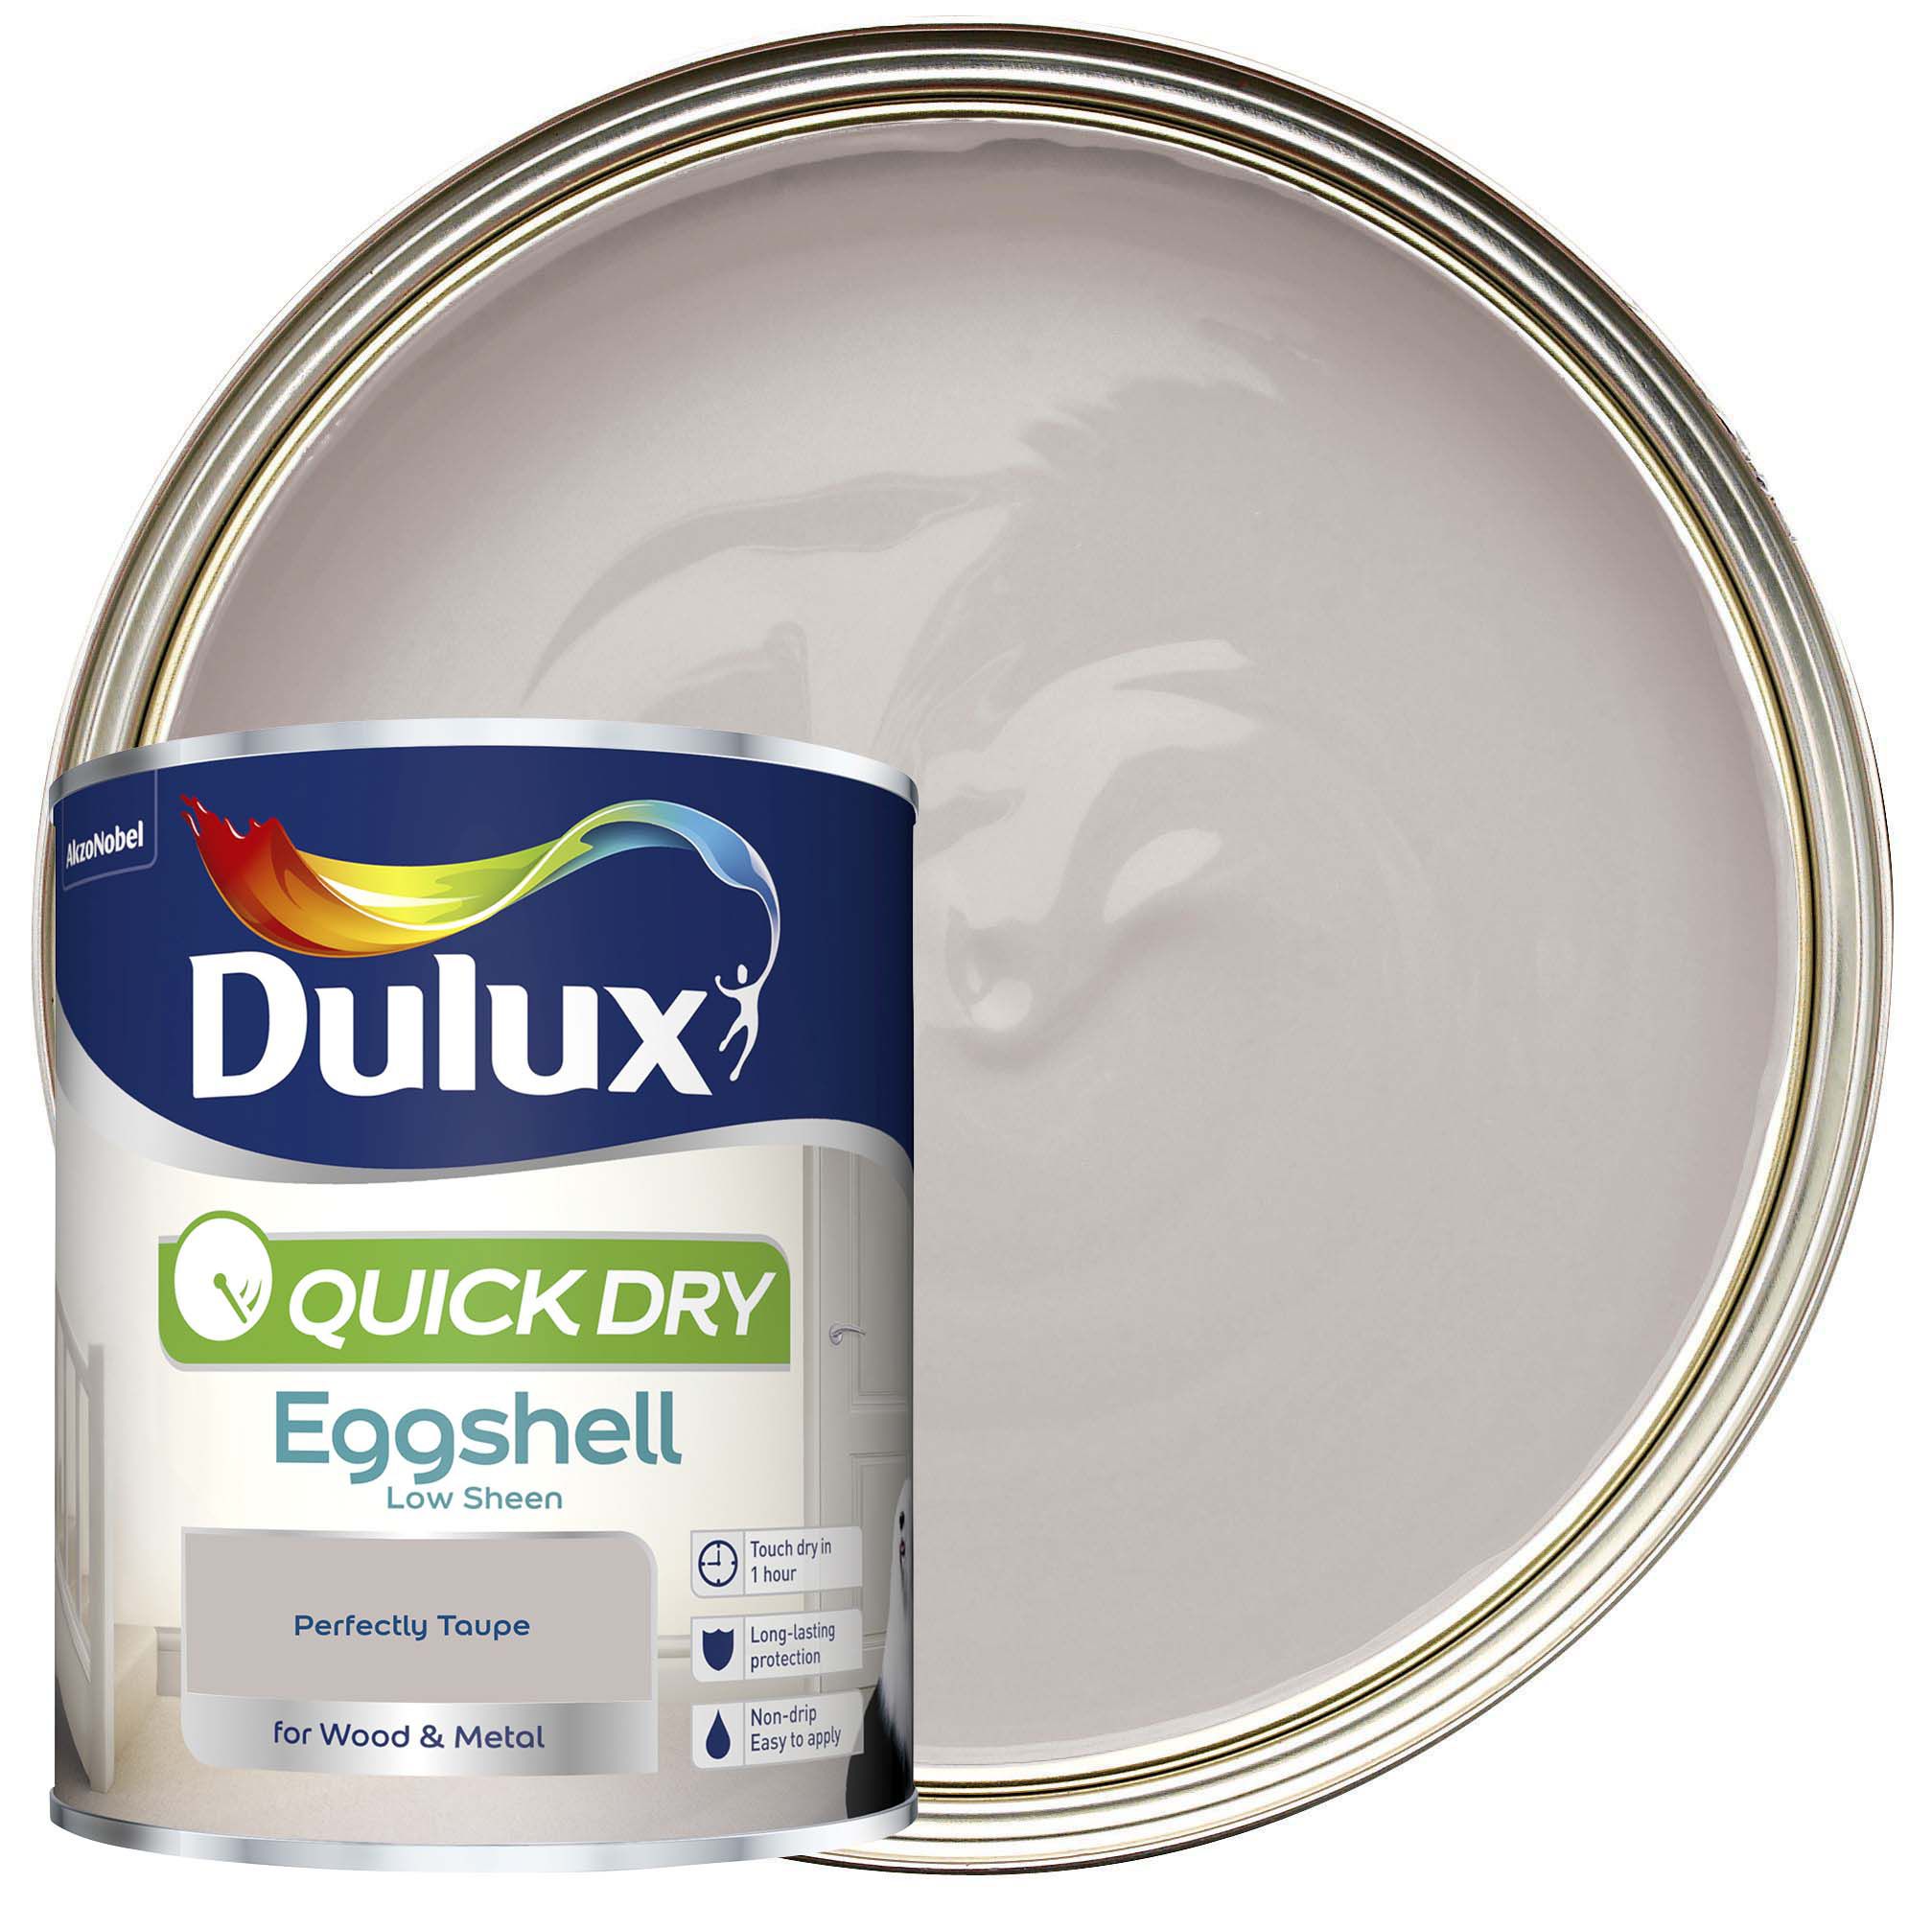 Dulux Quick Drying Eggshell Paint - Perfectly Taupe - 750ml